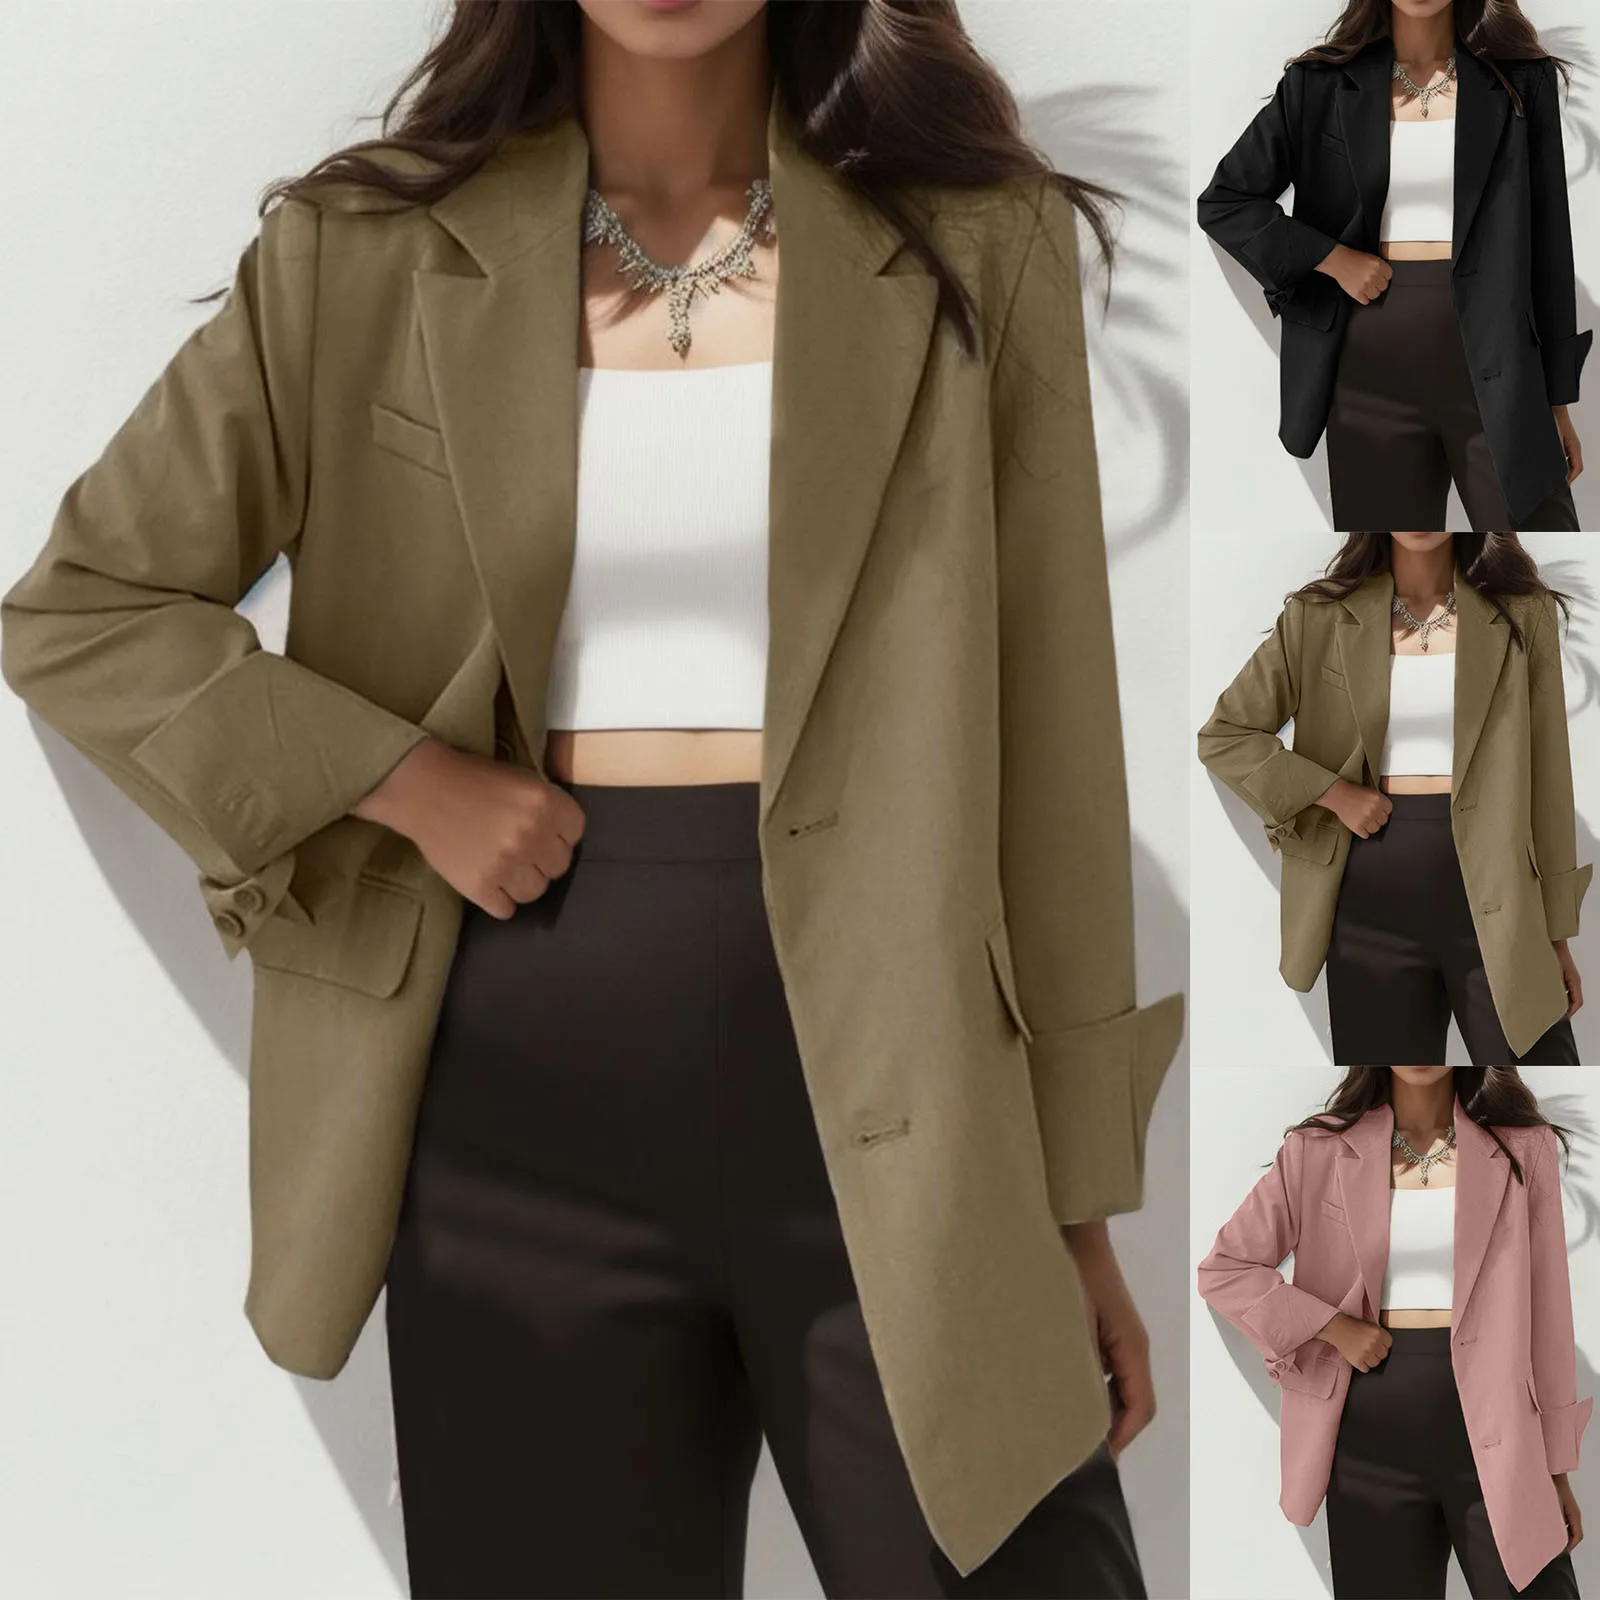 

Women Spring Summer Casual Simple Fashion Solid Color Button Cardigan Pocket Casual Suit Jacket Tan Wool Trench Coat Women